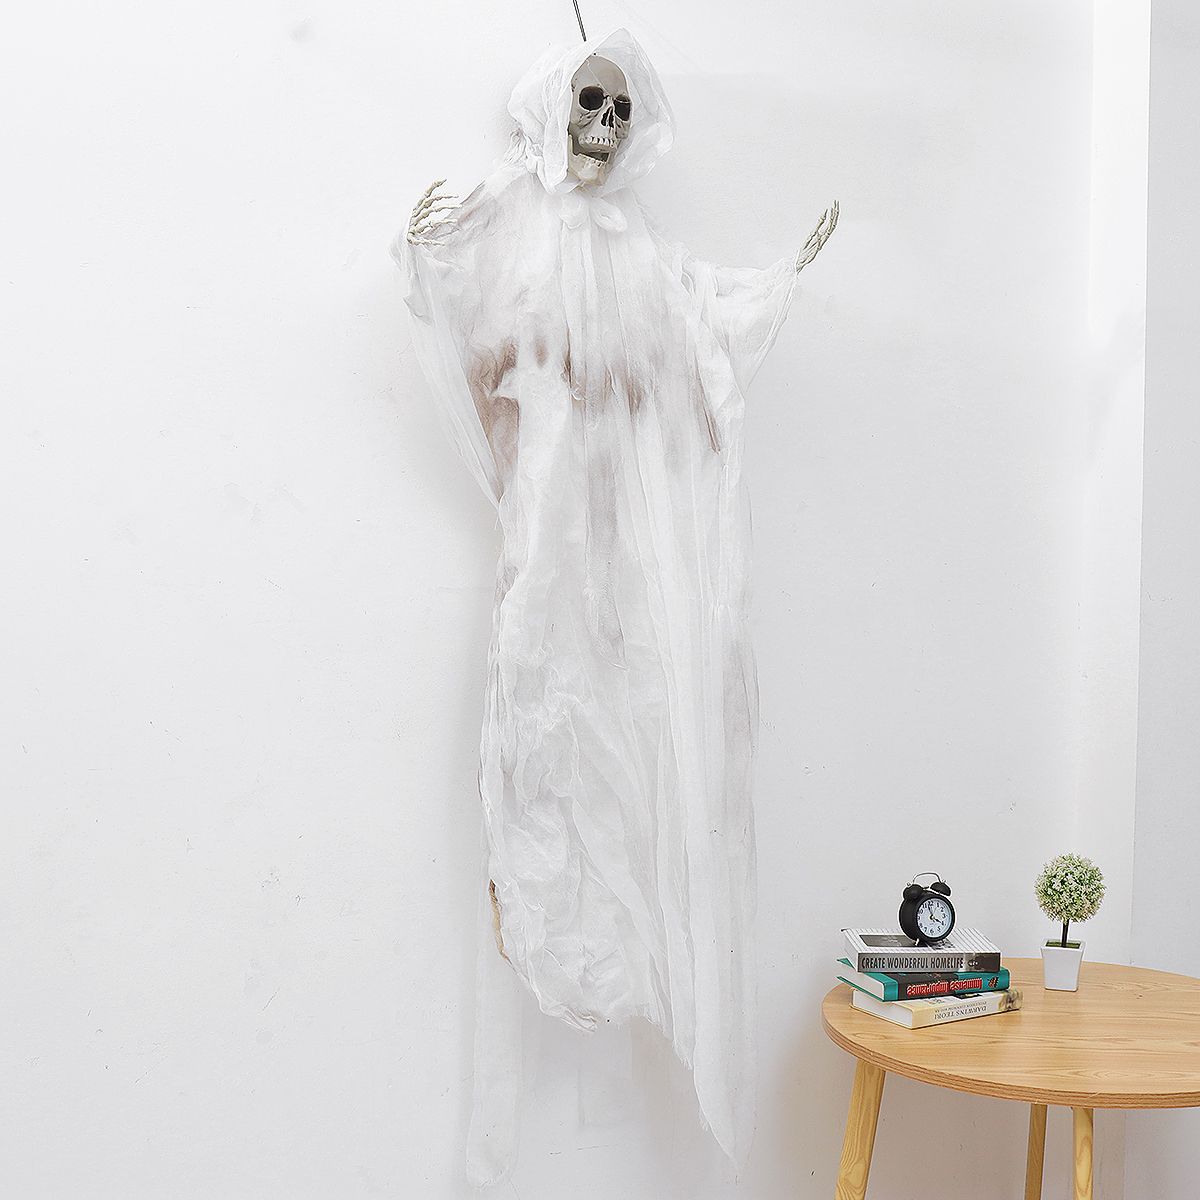 708rdquo-Halloween-Decoration-Hang-Scary-Skull-Doll-Chamber-Prop-Skeleton-1761609